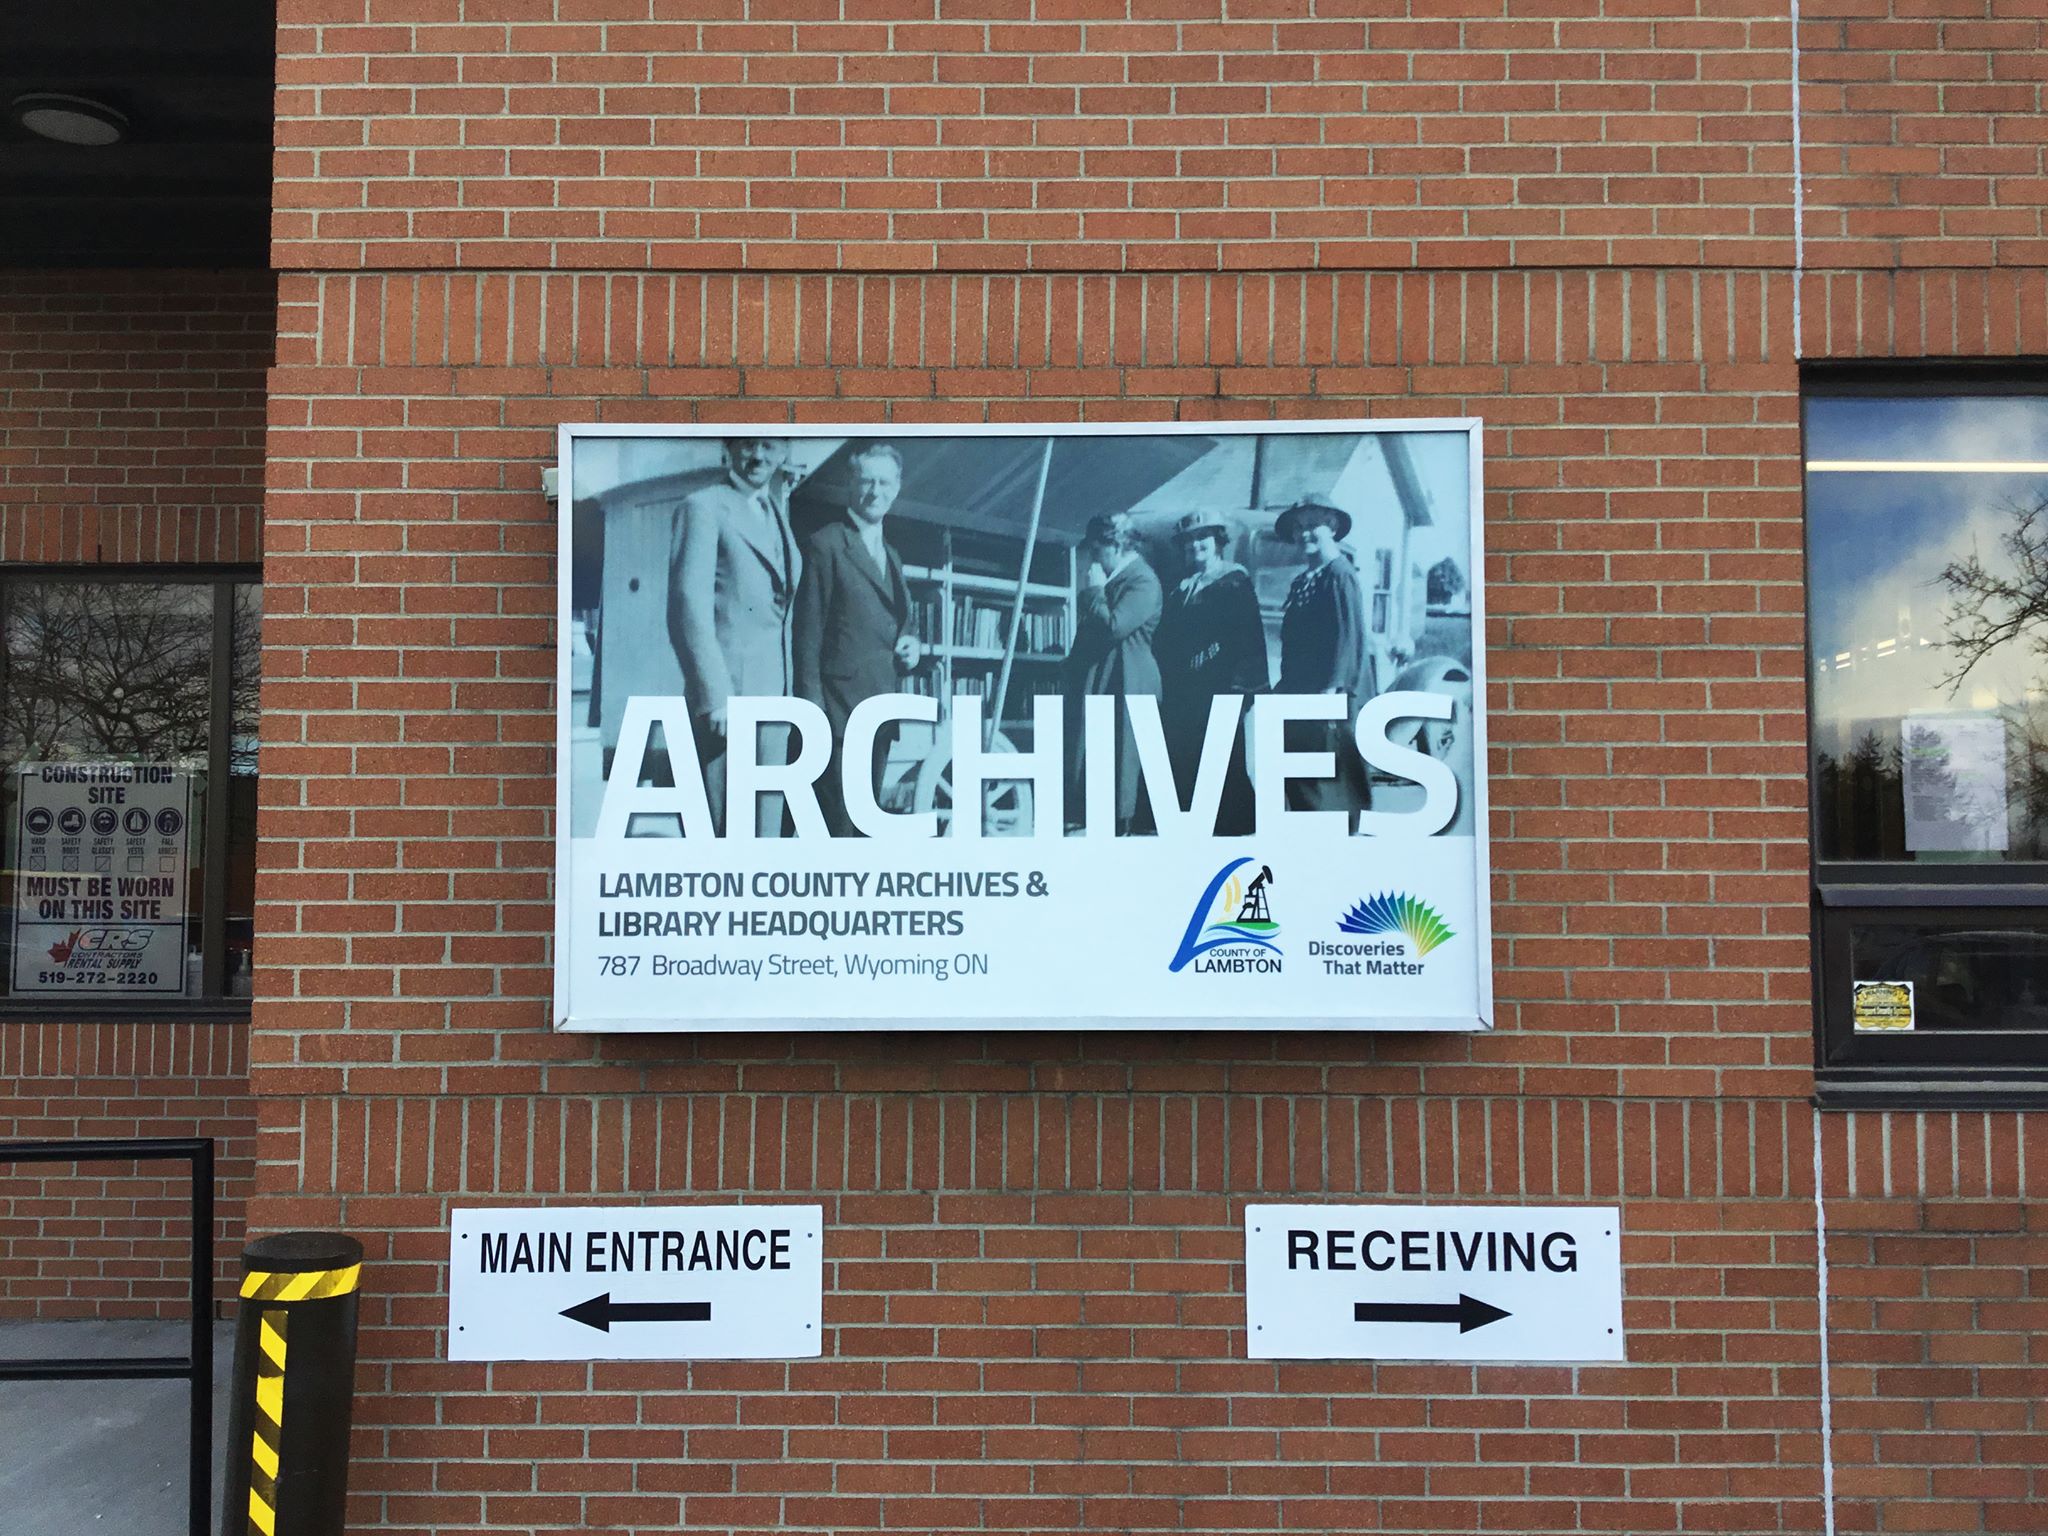 Lambton County archives has a fresh, new look